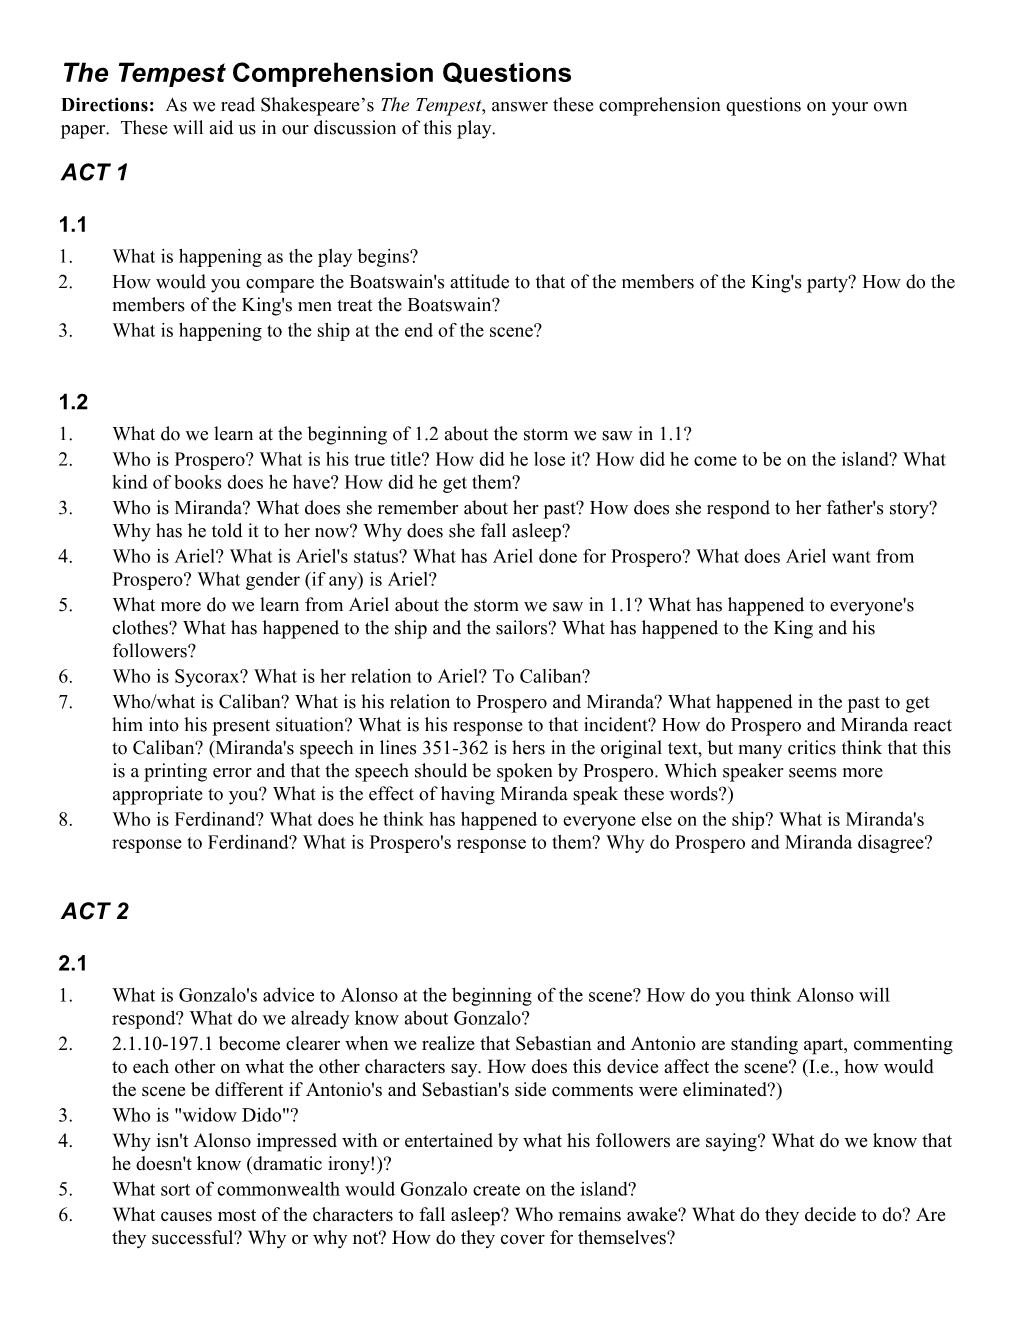 The Tempest Comprehension Questions